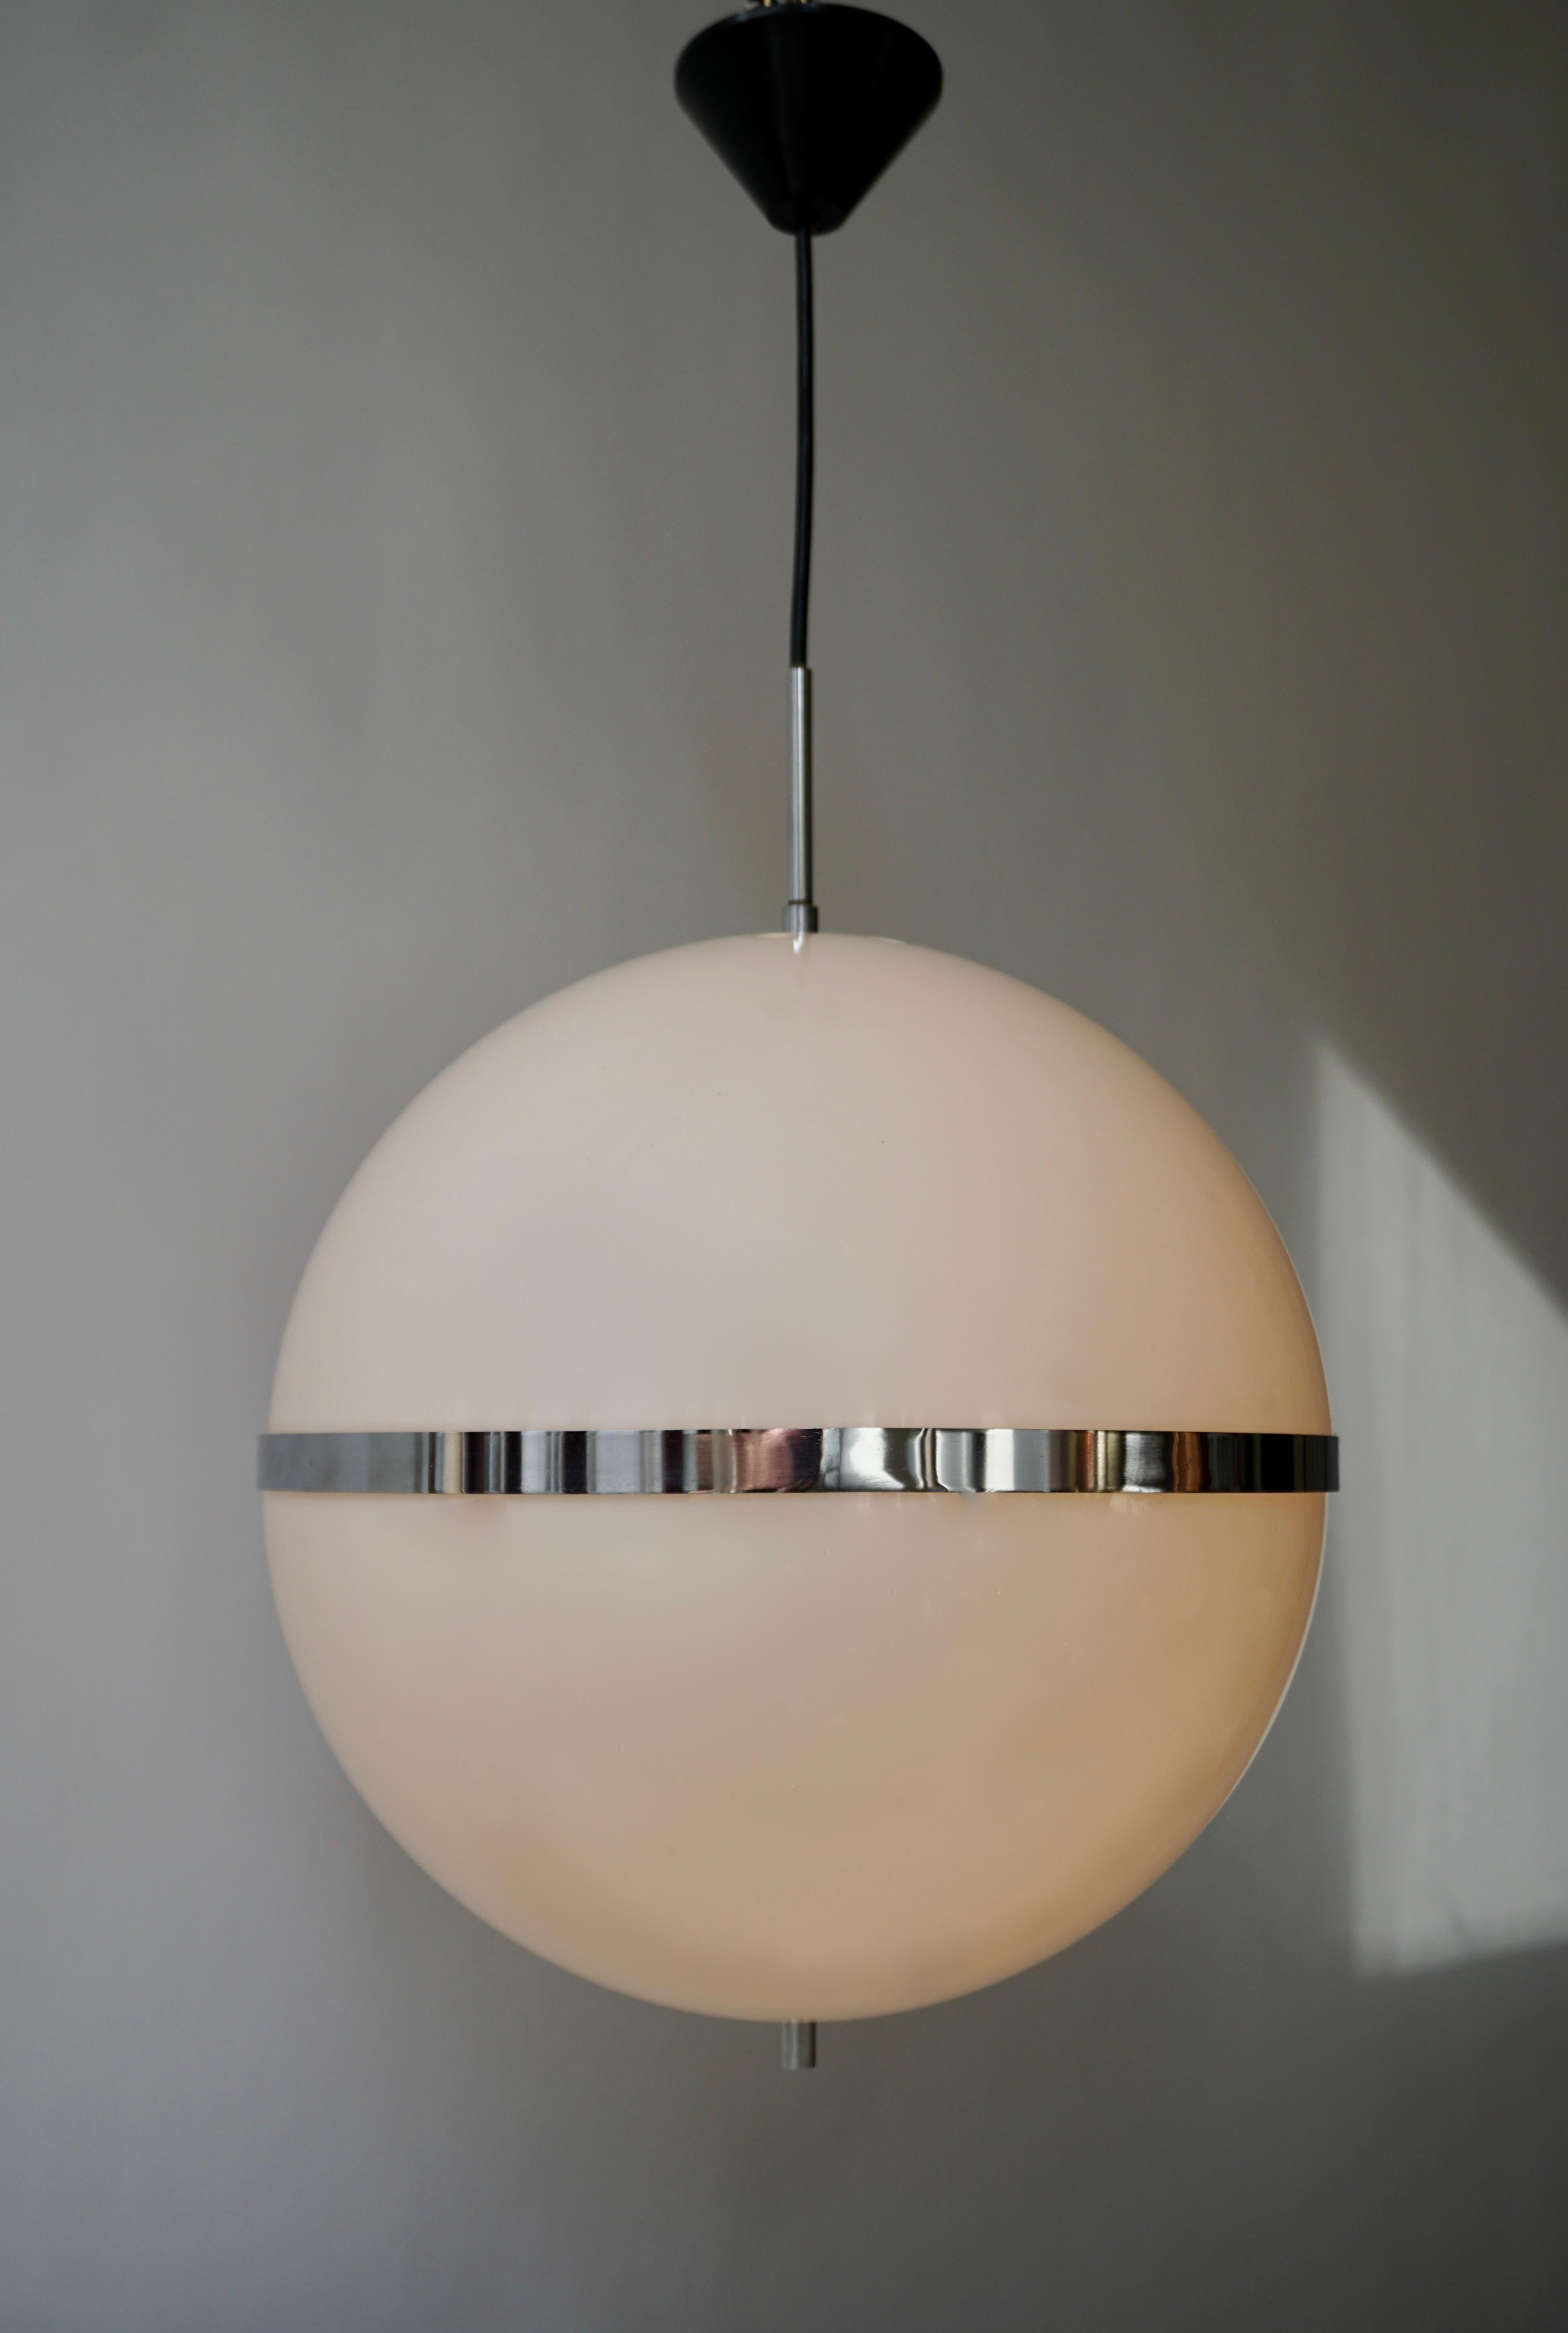 Rare and large pendant lamp in the style of Harvey Guzzini, Italy, 1960s-1970s. The light consists of a large sphere shaped shade in milky white plastic. These two parts are being complemented with beautiful chrome-plated metal details. This amazing